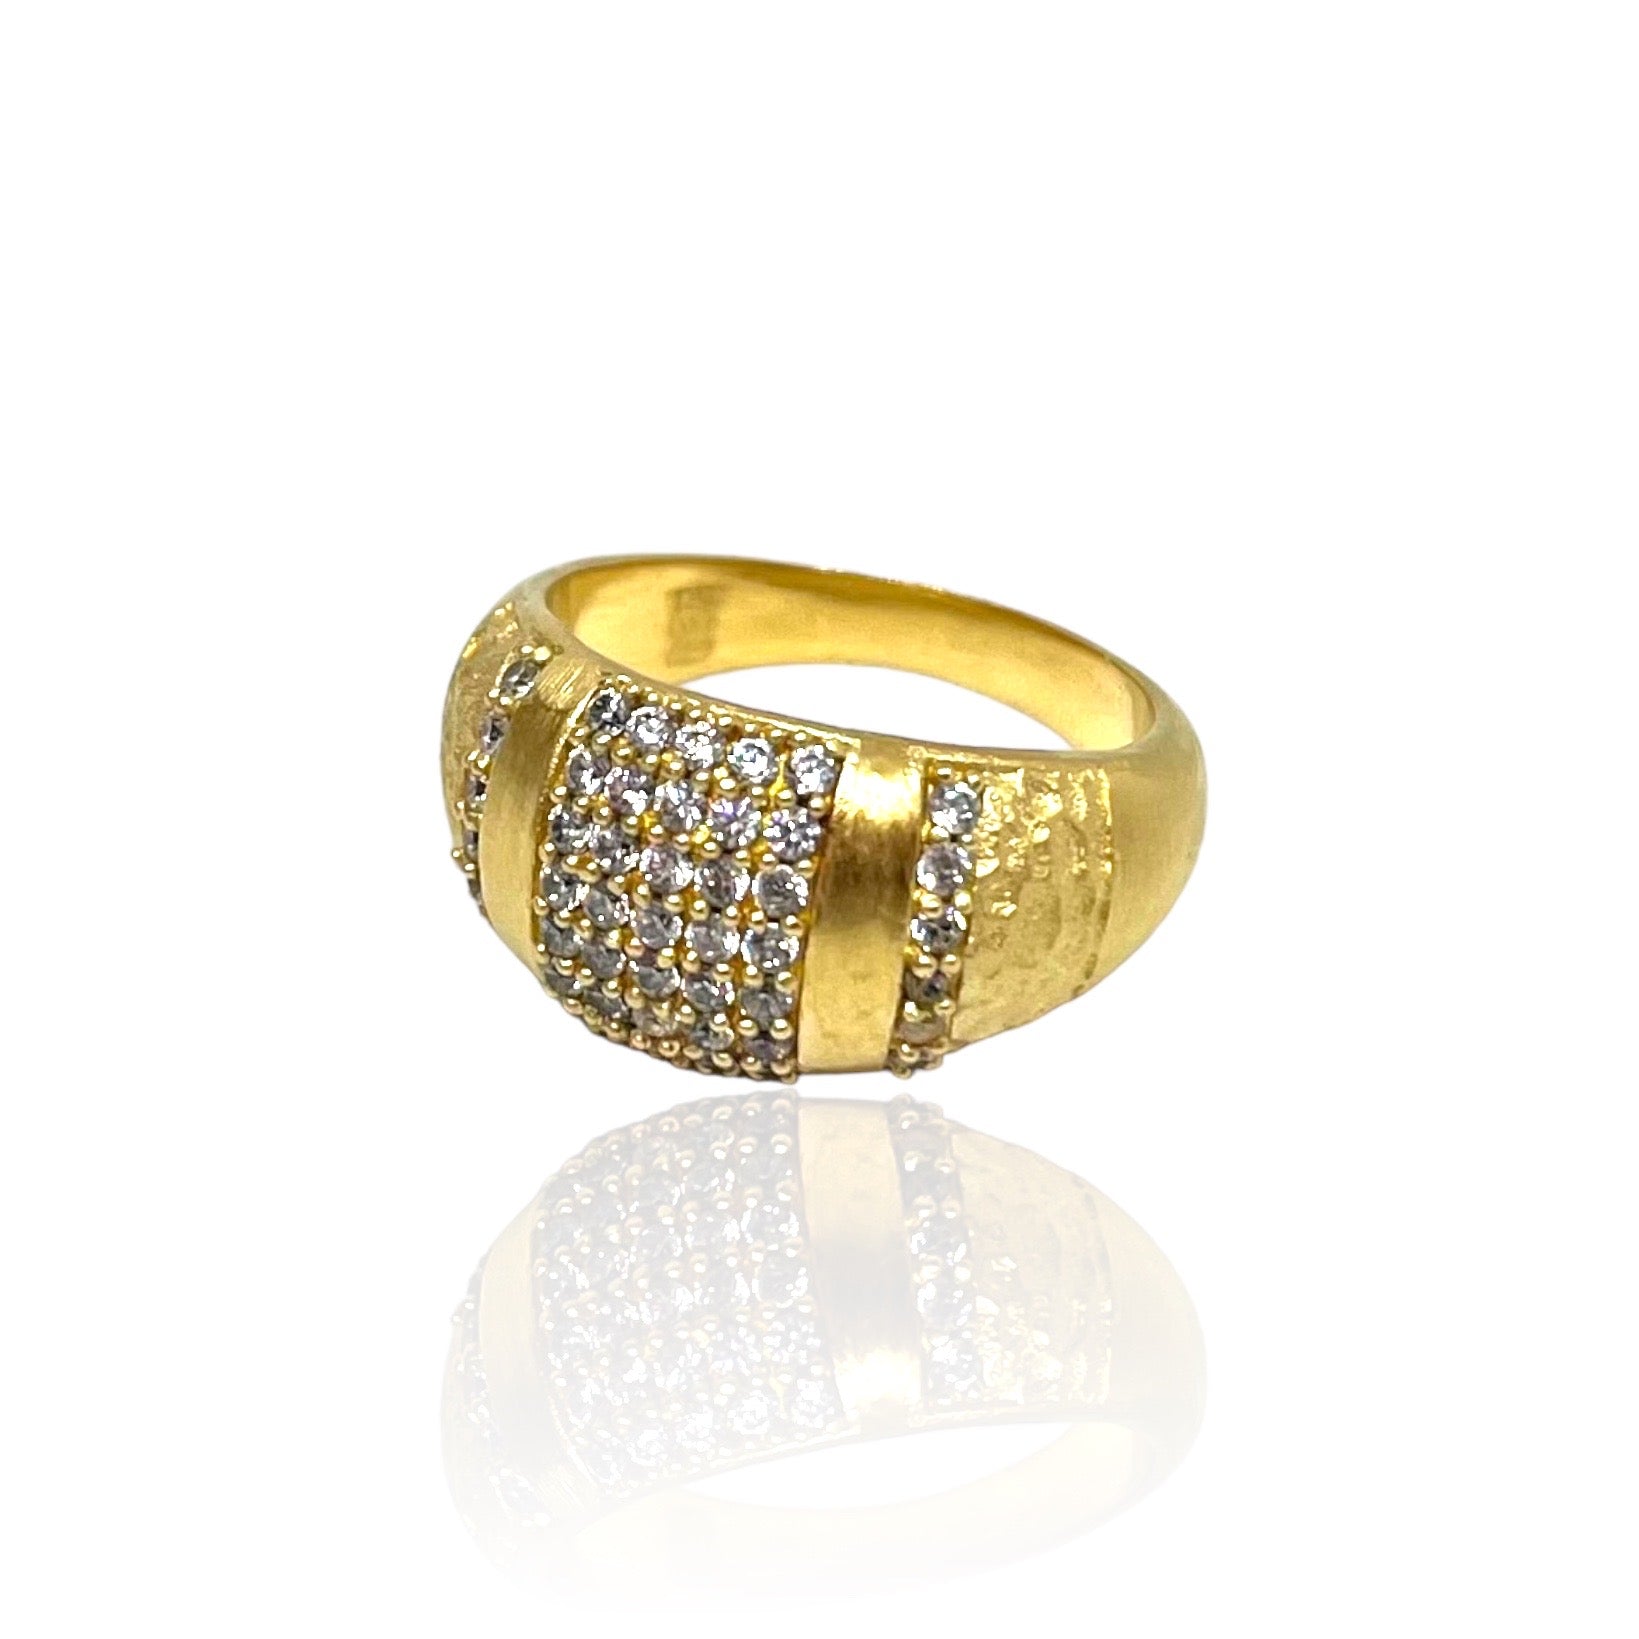 GOLD PAVE COCKTAIL RING